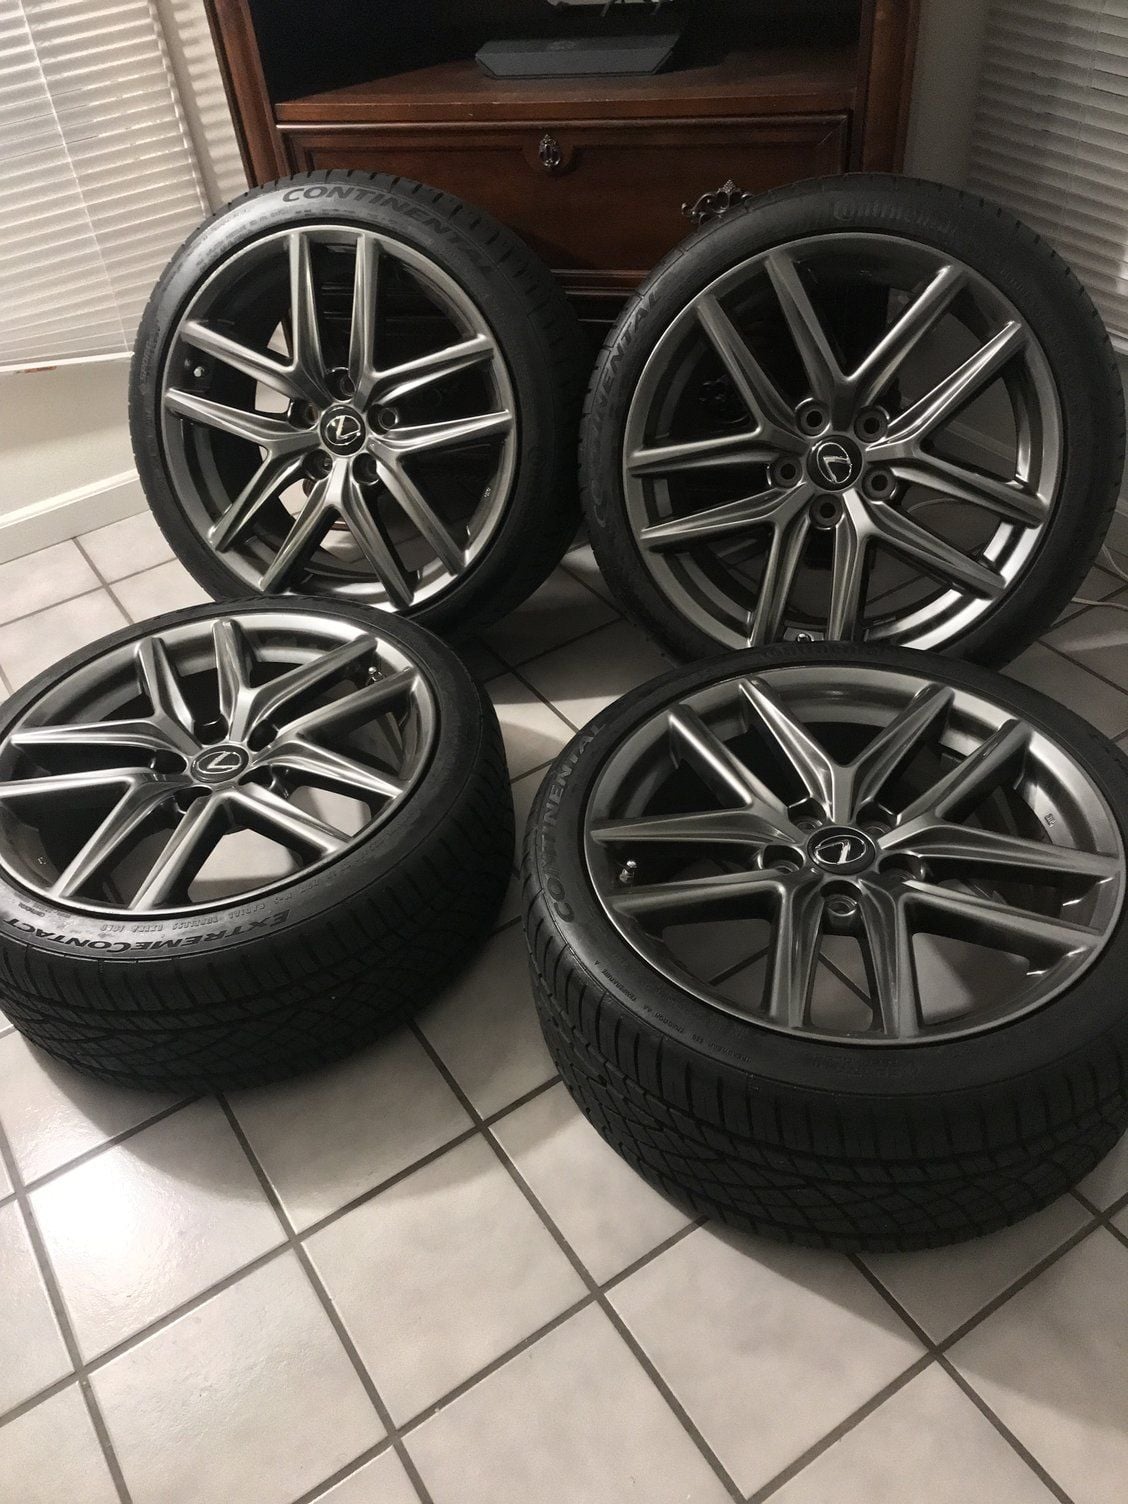 Wheels and Tires/Axles - WTB 2014+ IS F-Sport Wheels - Used - 2014 to 2020 Any Make All Models - Wilmington, NC 28401, United States